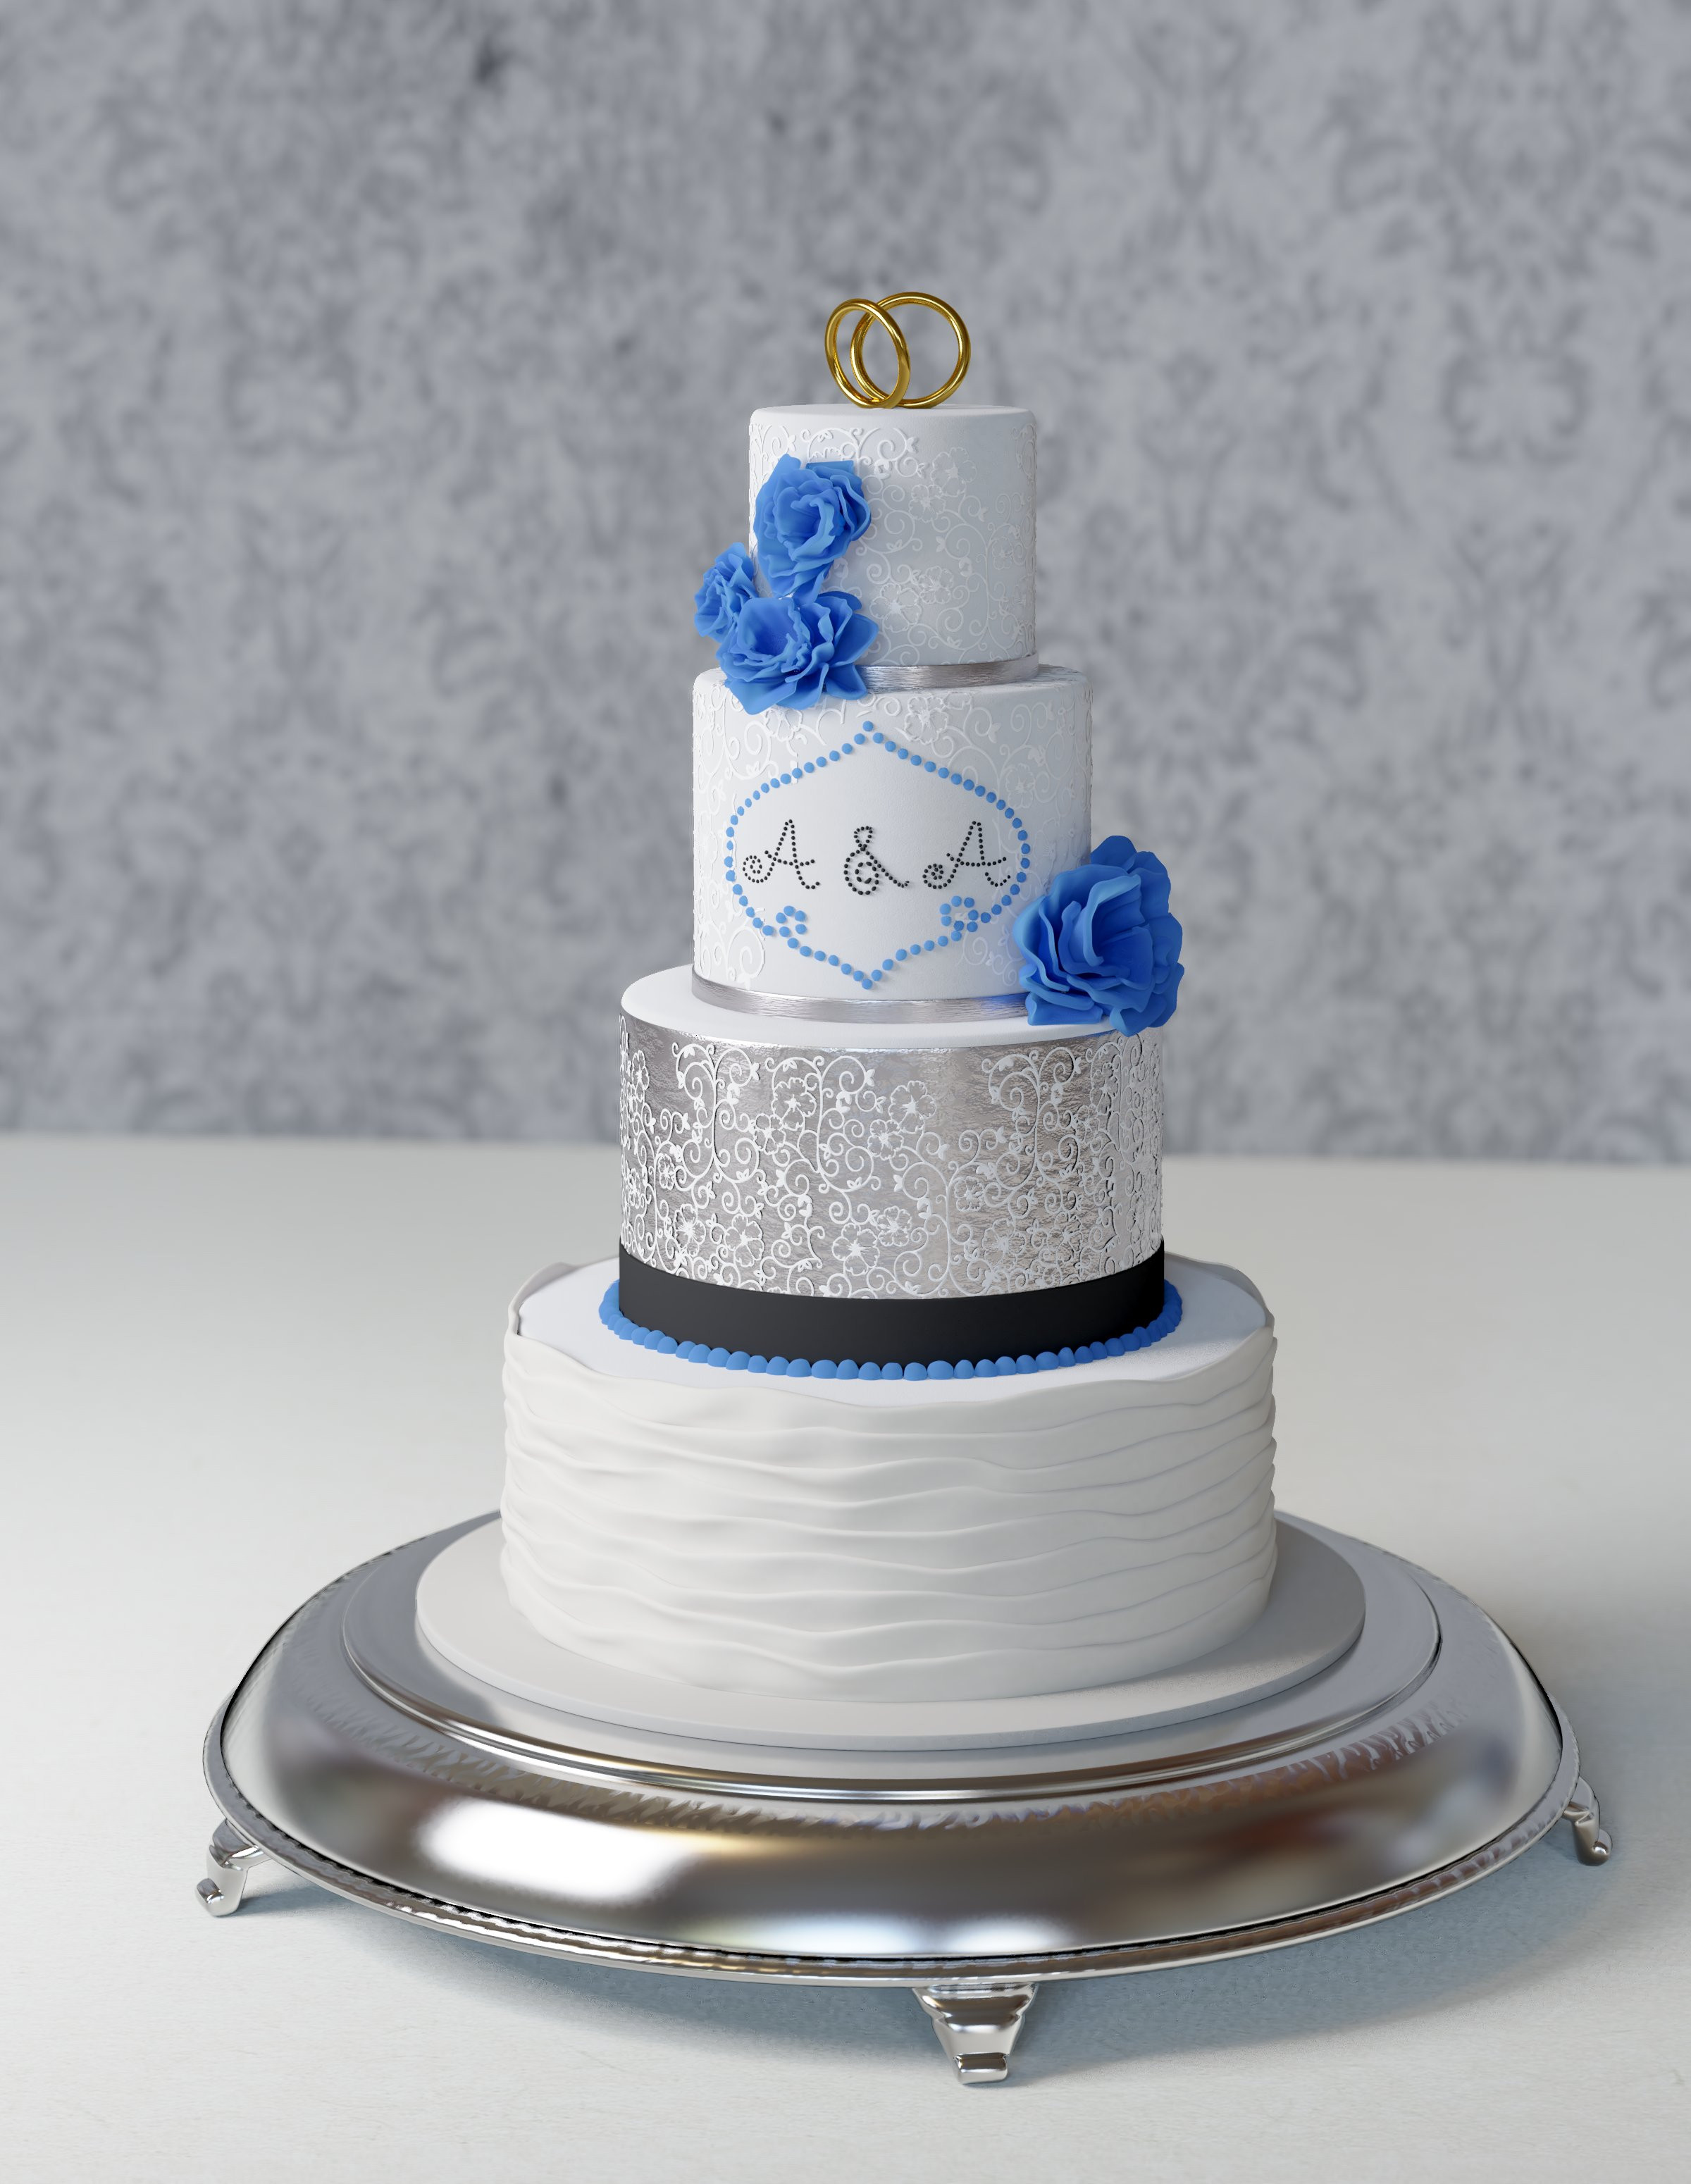 High-poly model and beauty render.
A wedding cake, with several different materials and shapes, made using various techniques.